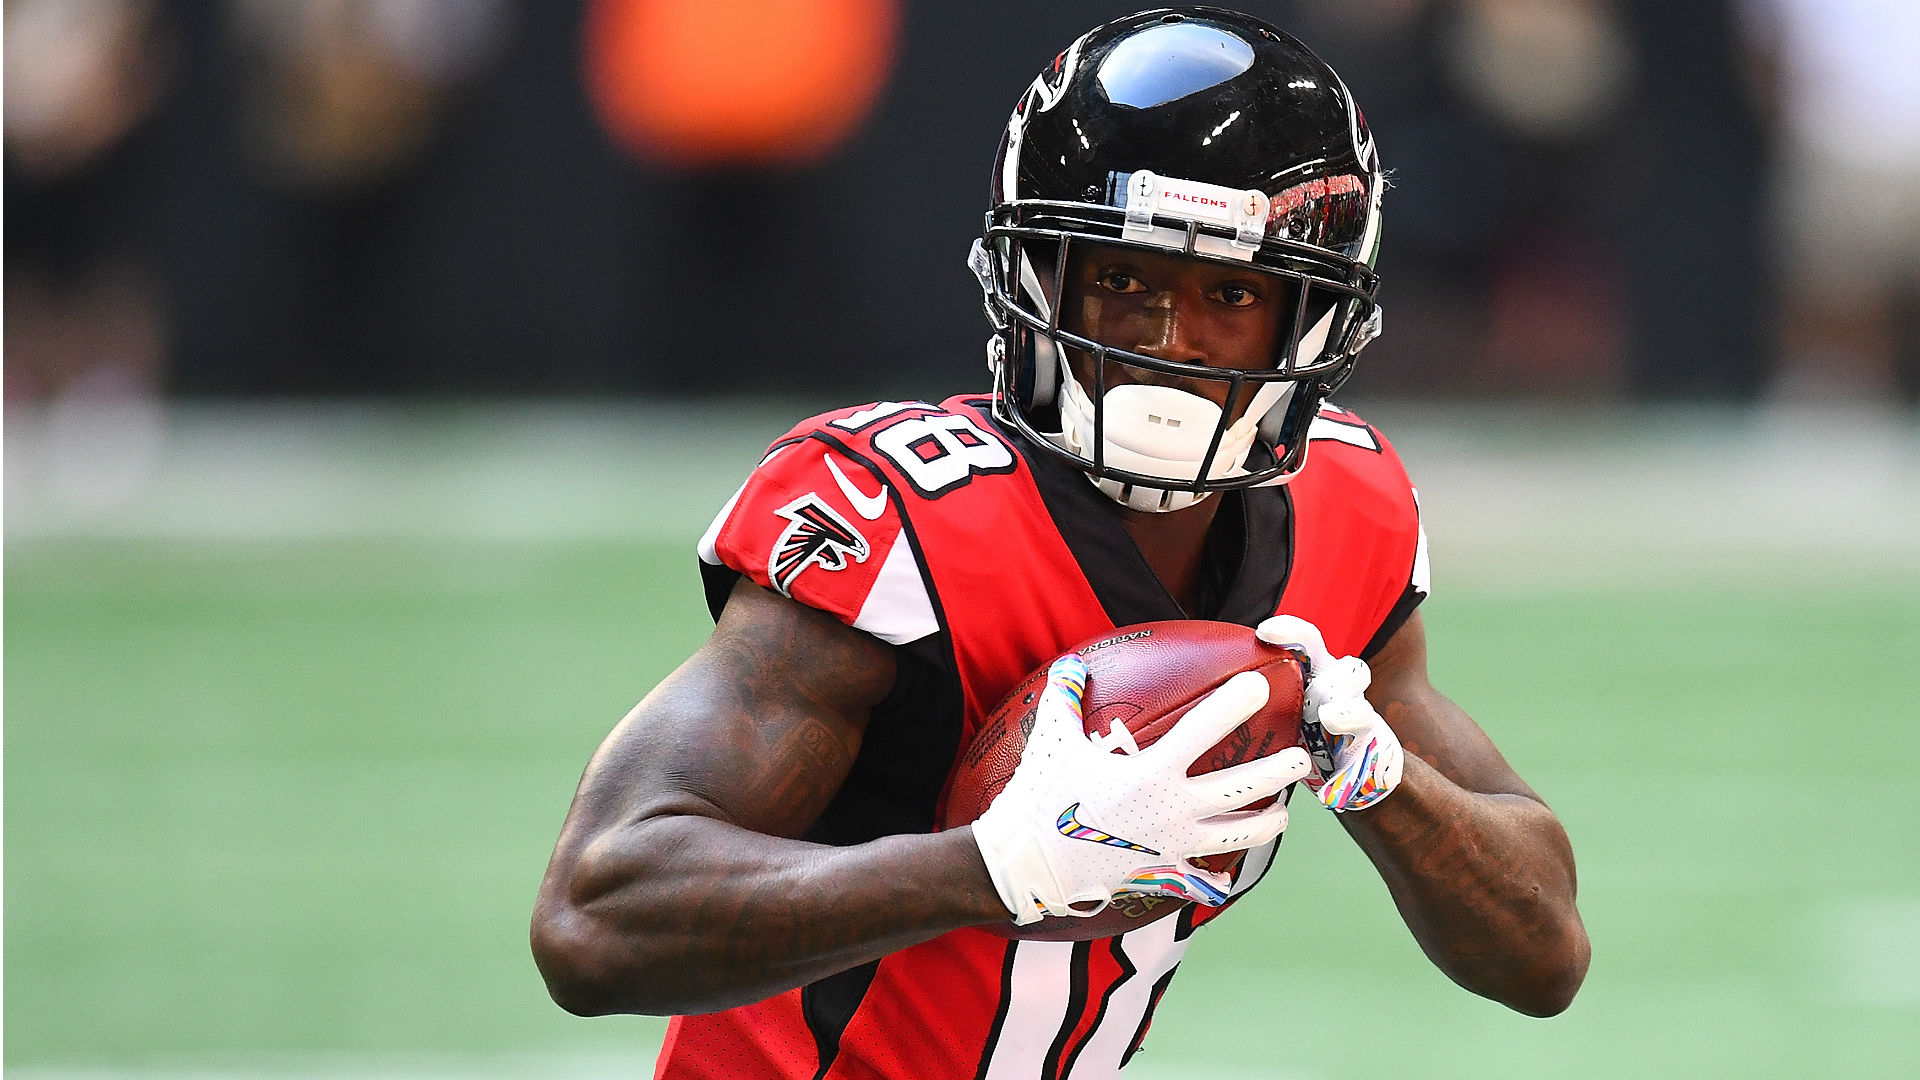 Flipboard: Calvin Ridley injury update: Falcons rookie WR expected to play against Giants1920 x 1080